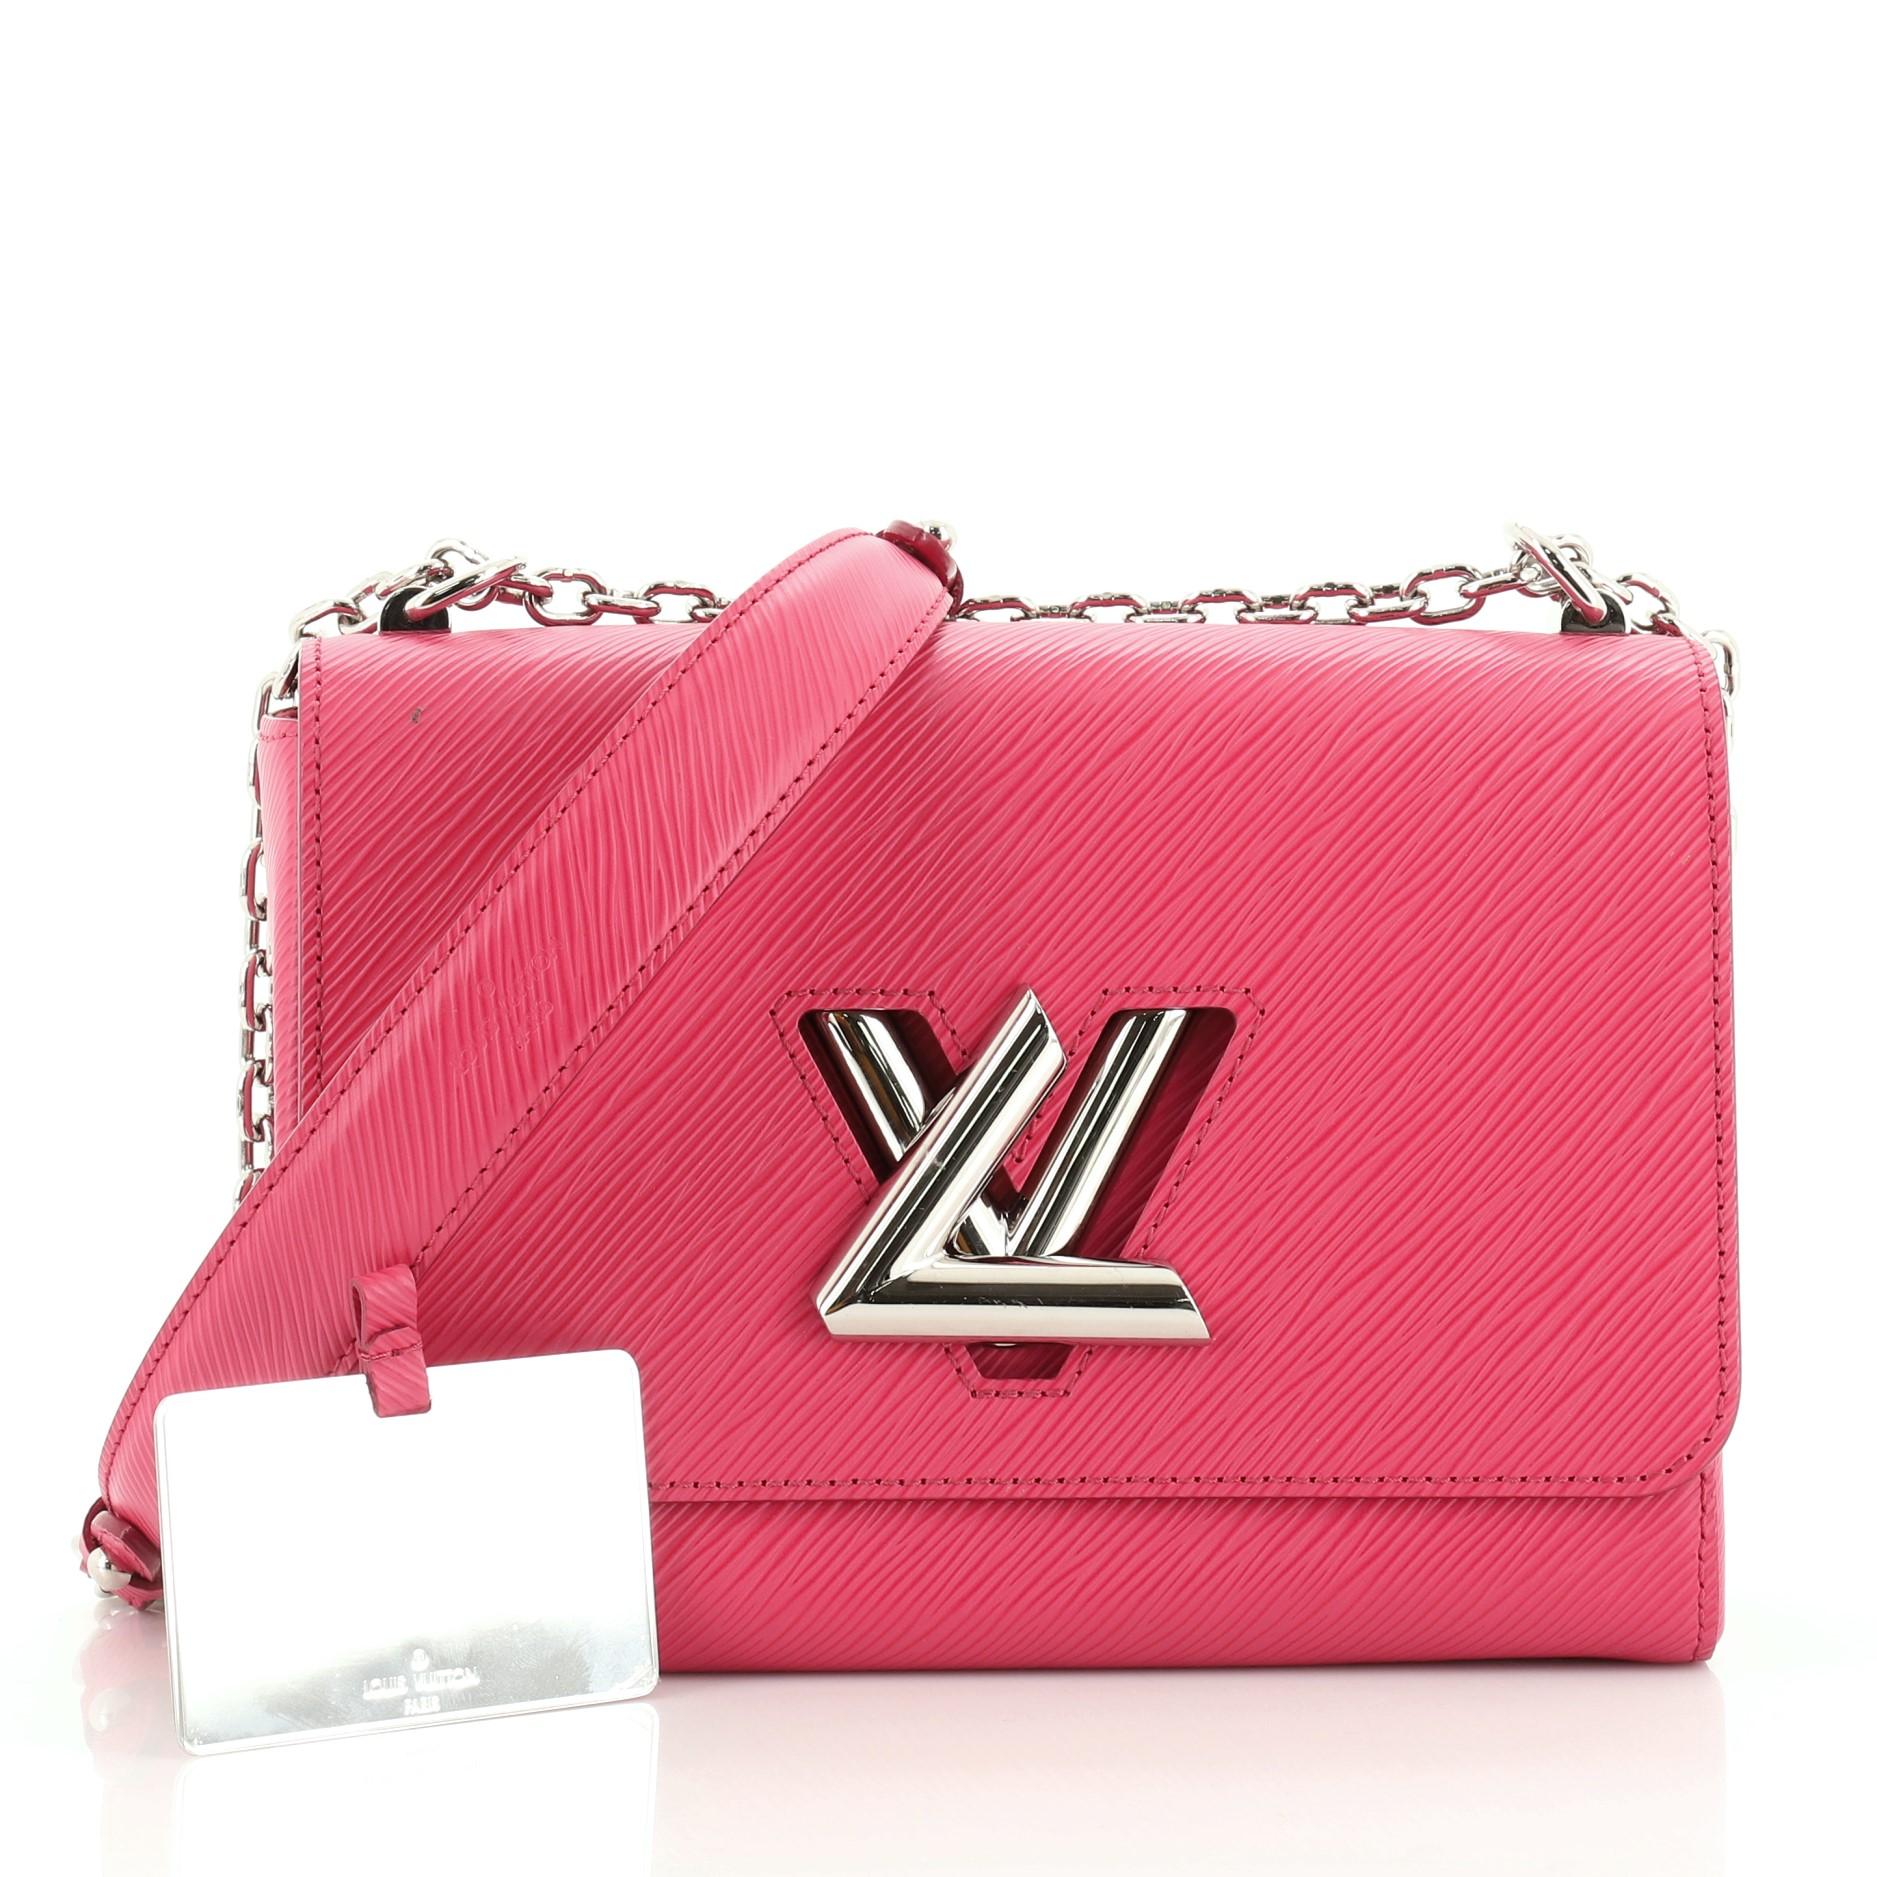 This Louis Vuitton Twist Handbag Epi Leather MM, crafted from pink epi leather, features chain link strap with leather pad, frontal flap, and silver-tone hardware. Its LV twist lock closure opens to a pink microfiber interior with slip pockets.